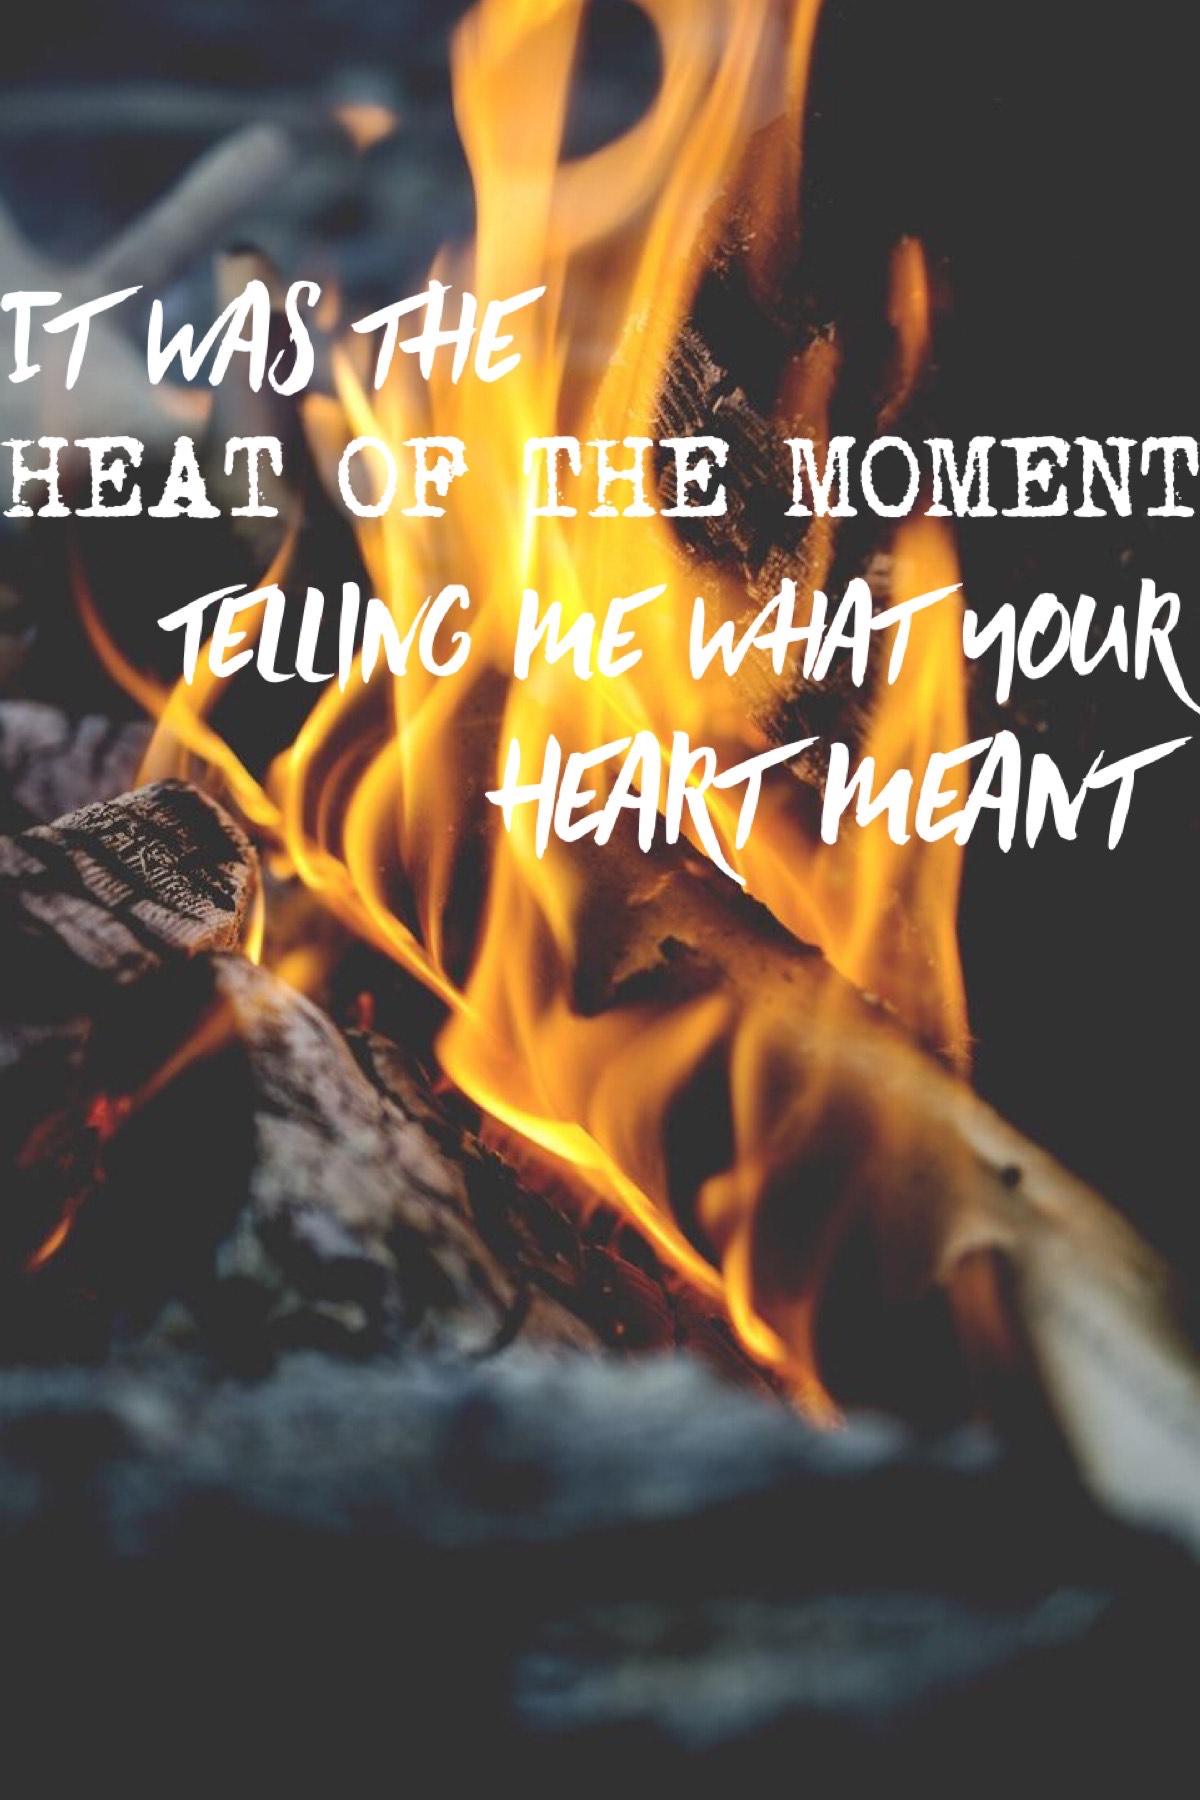 Heat Of The Moment// Asia

You’ll thank me when it’s Wednesday.